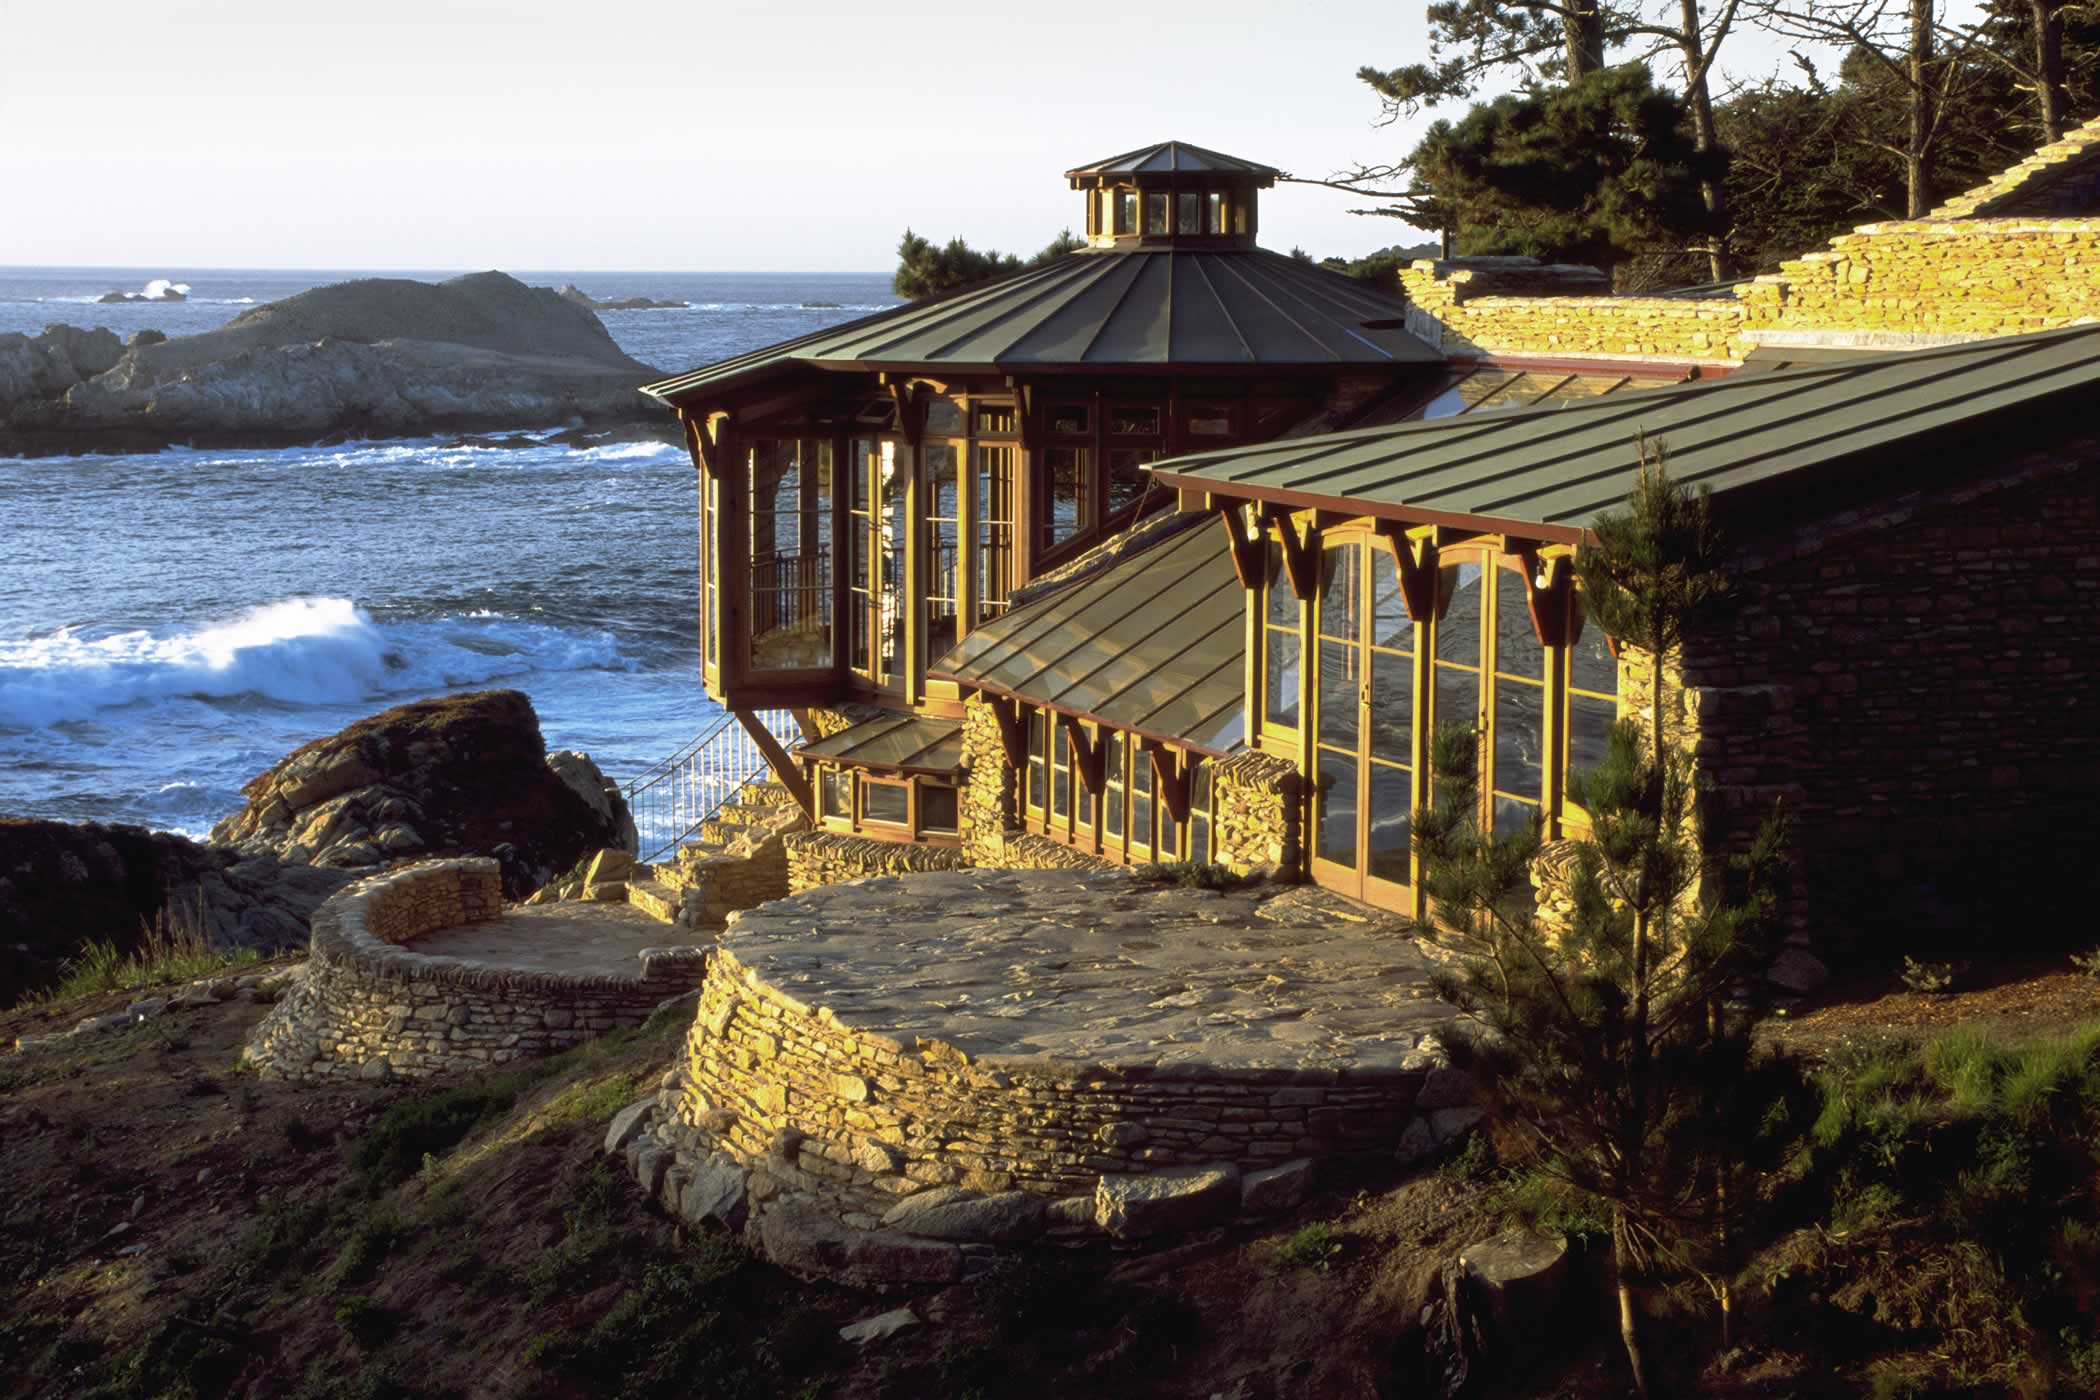 The James House Greenhouse, Carmel Highlands, California: The stone and recycled timber greenhouse with copper and glass roofs and curved stone external patios looks out to spectacular Point Lobos State Reserve. Photo by James Morrison.